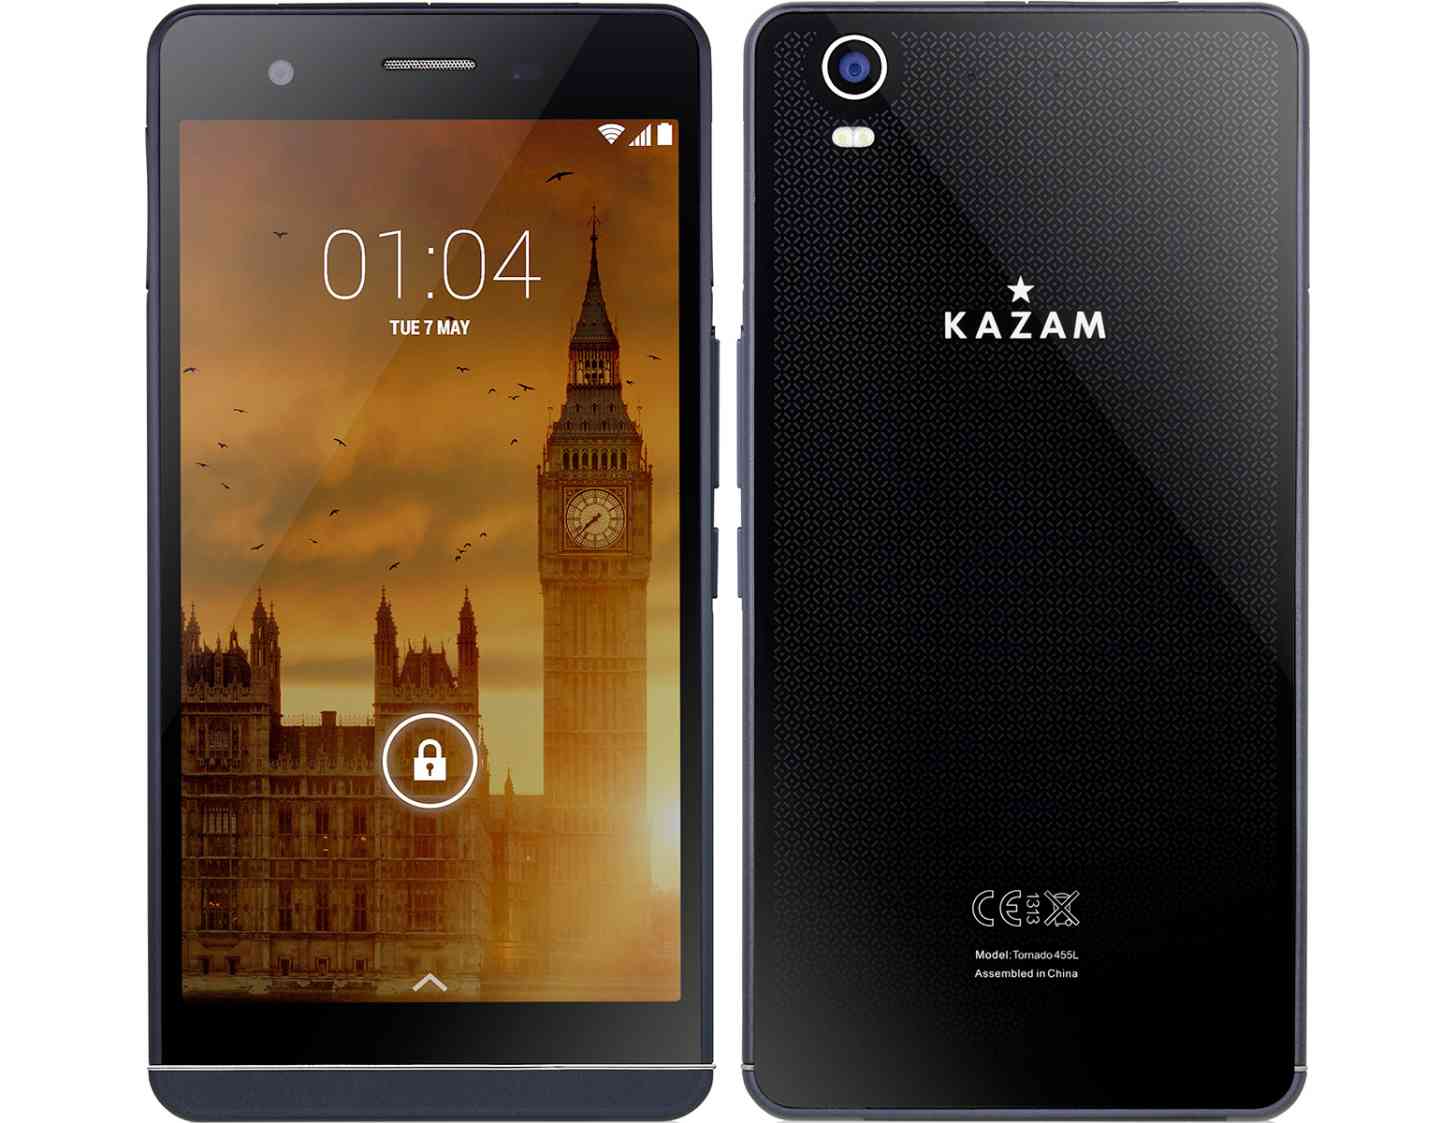 Kazam Tornado 455L Android official MWC 2015